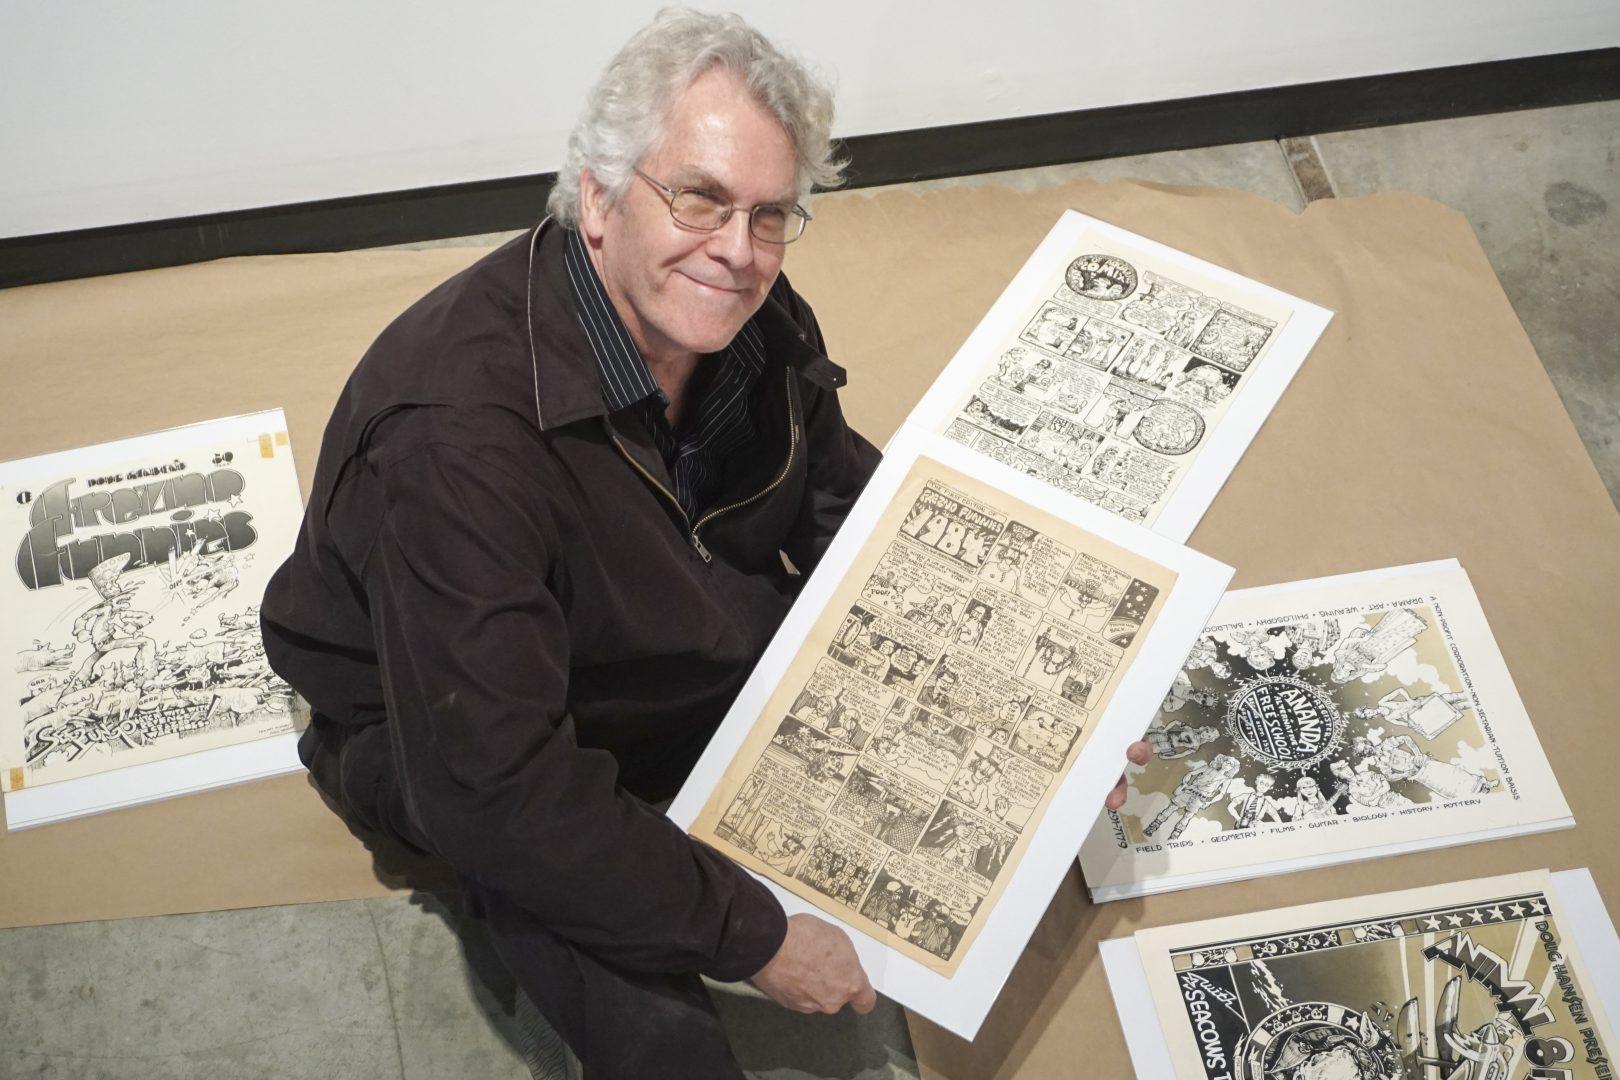 Doug Hansen showcases comics he created for the Daily Collegian as a student in the 1970s in the Conley Art Gallery on Friday, Jan. 19, 2018. (Eric Zamora/The Collegian)